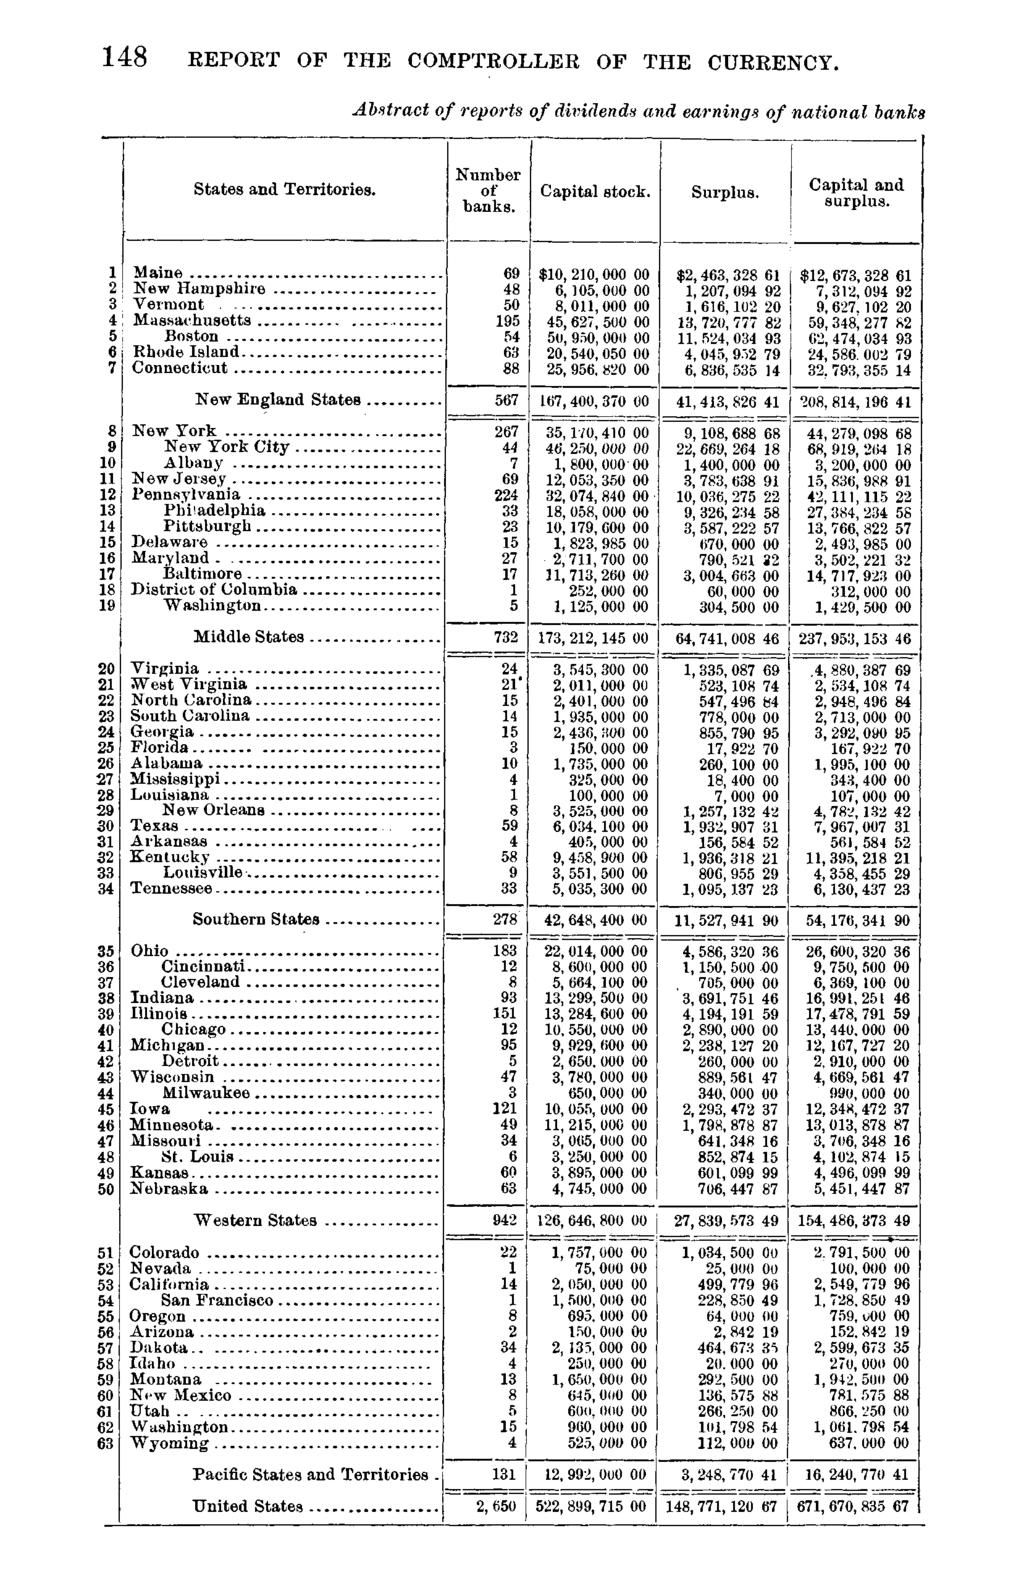 148 REPORT OF THE COMPTROLLER OF THE CURRENCY. Abstract of reports of dividends and earnings of national banks States and Territories. Number of banks. Capital stock. Surplus. Capital and surplus.